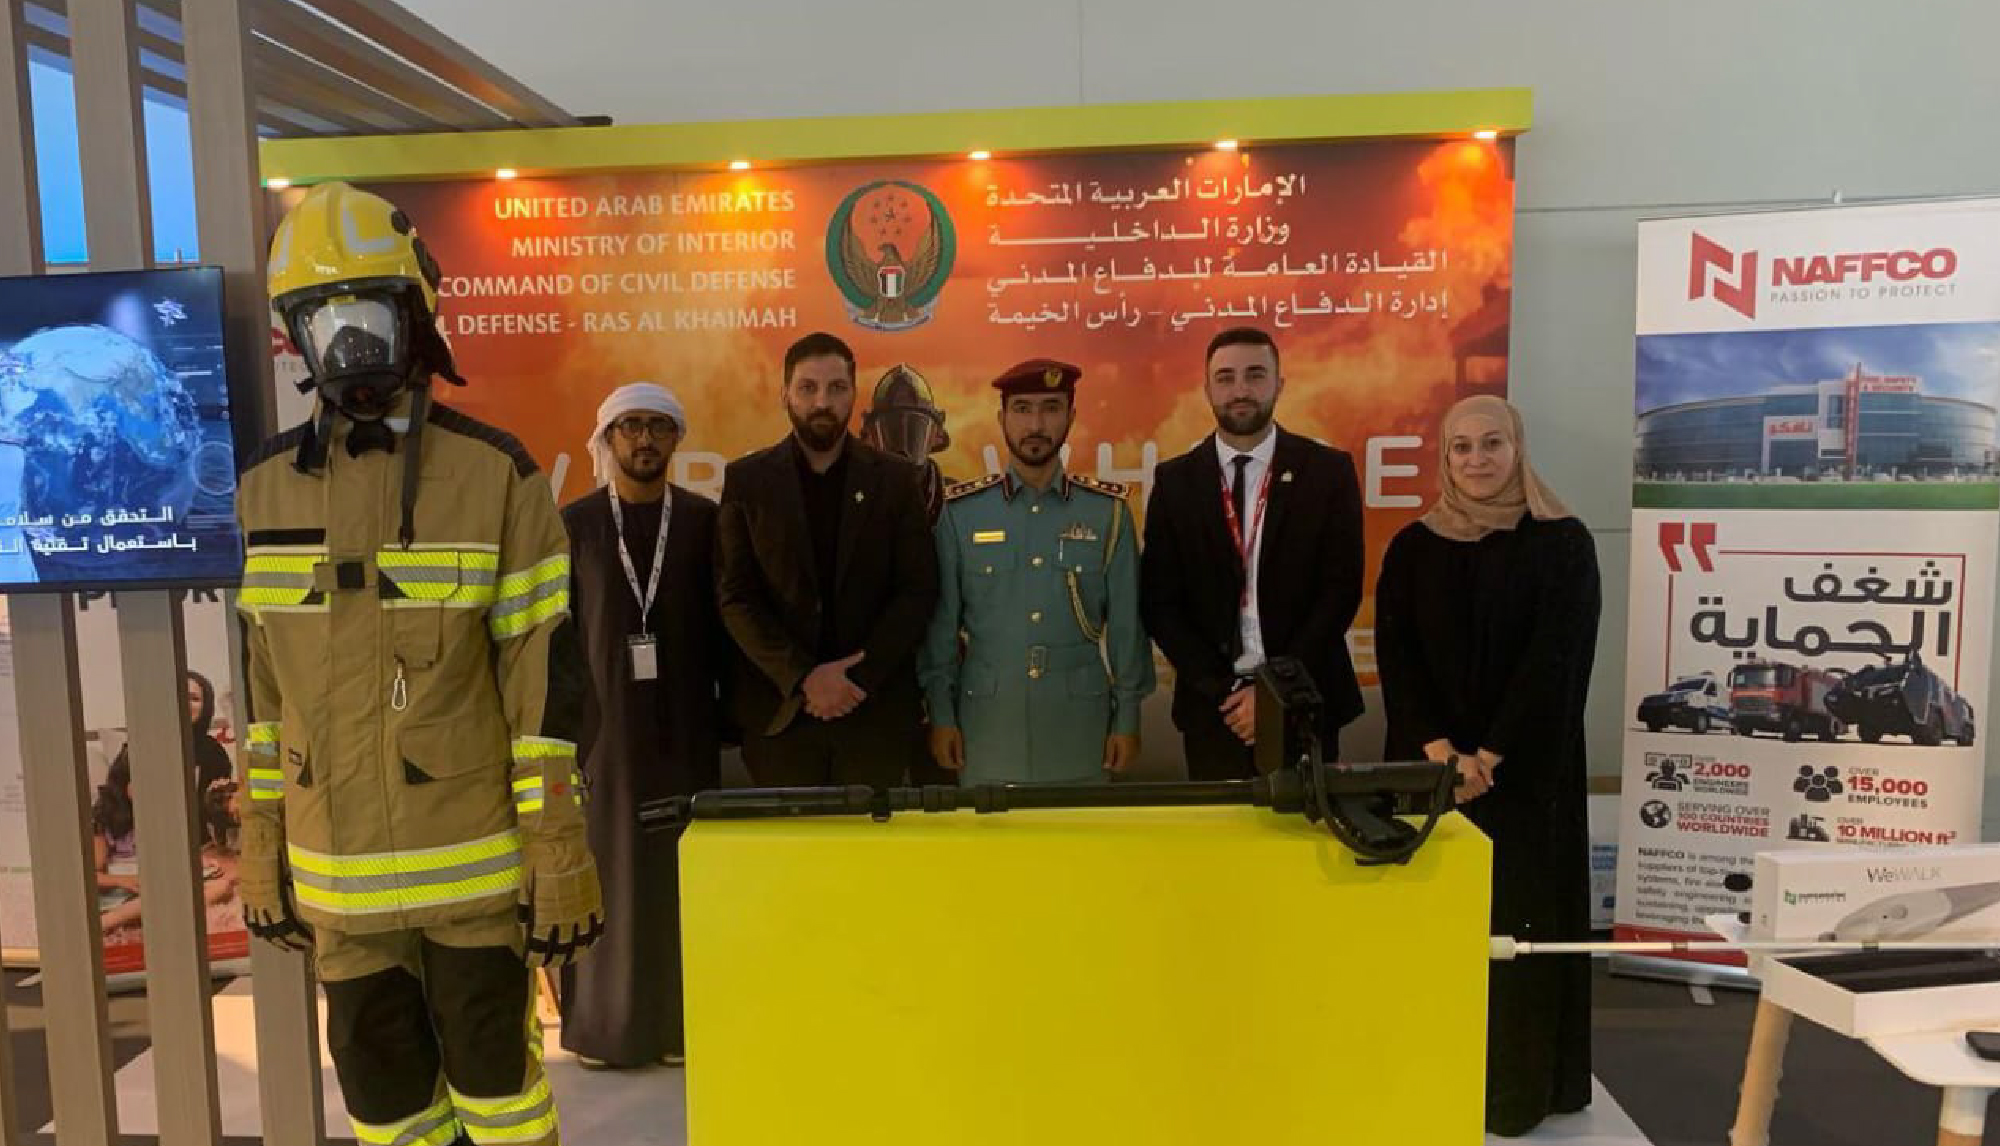 We Were Honored to Participate in the Civil Defense Event in Ras Al Khaimah